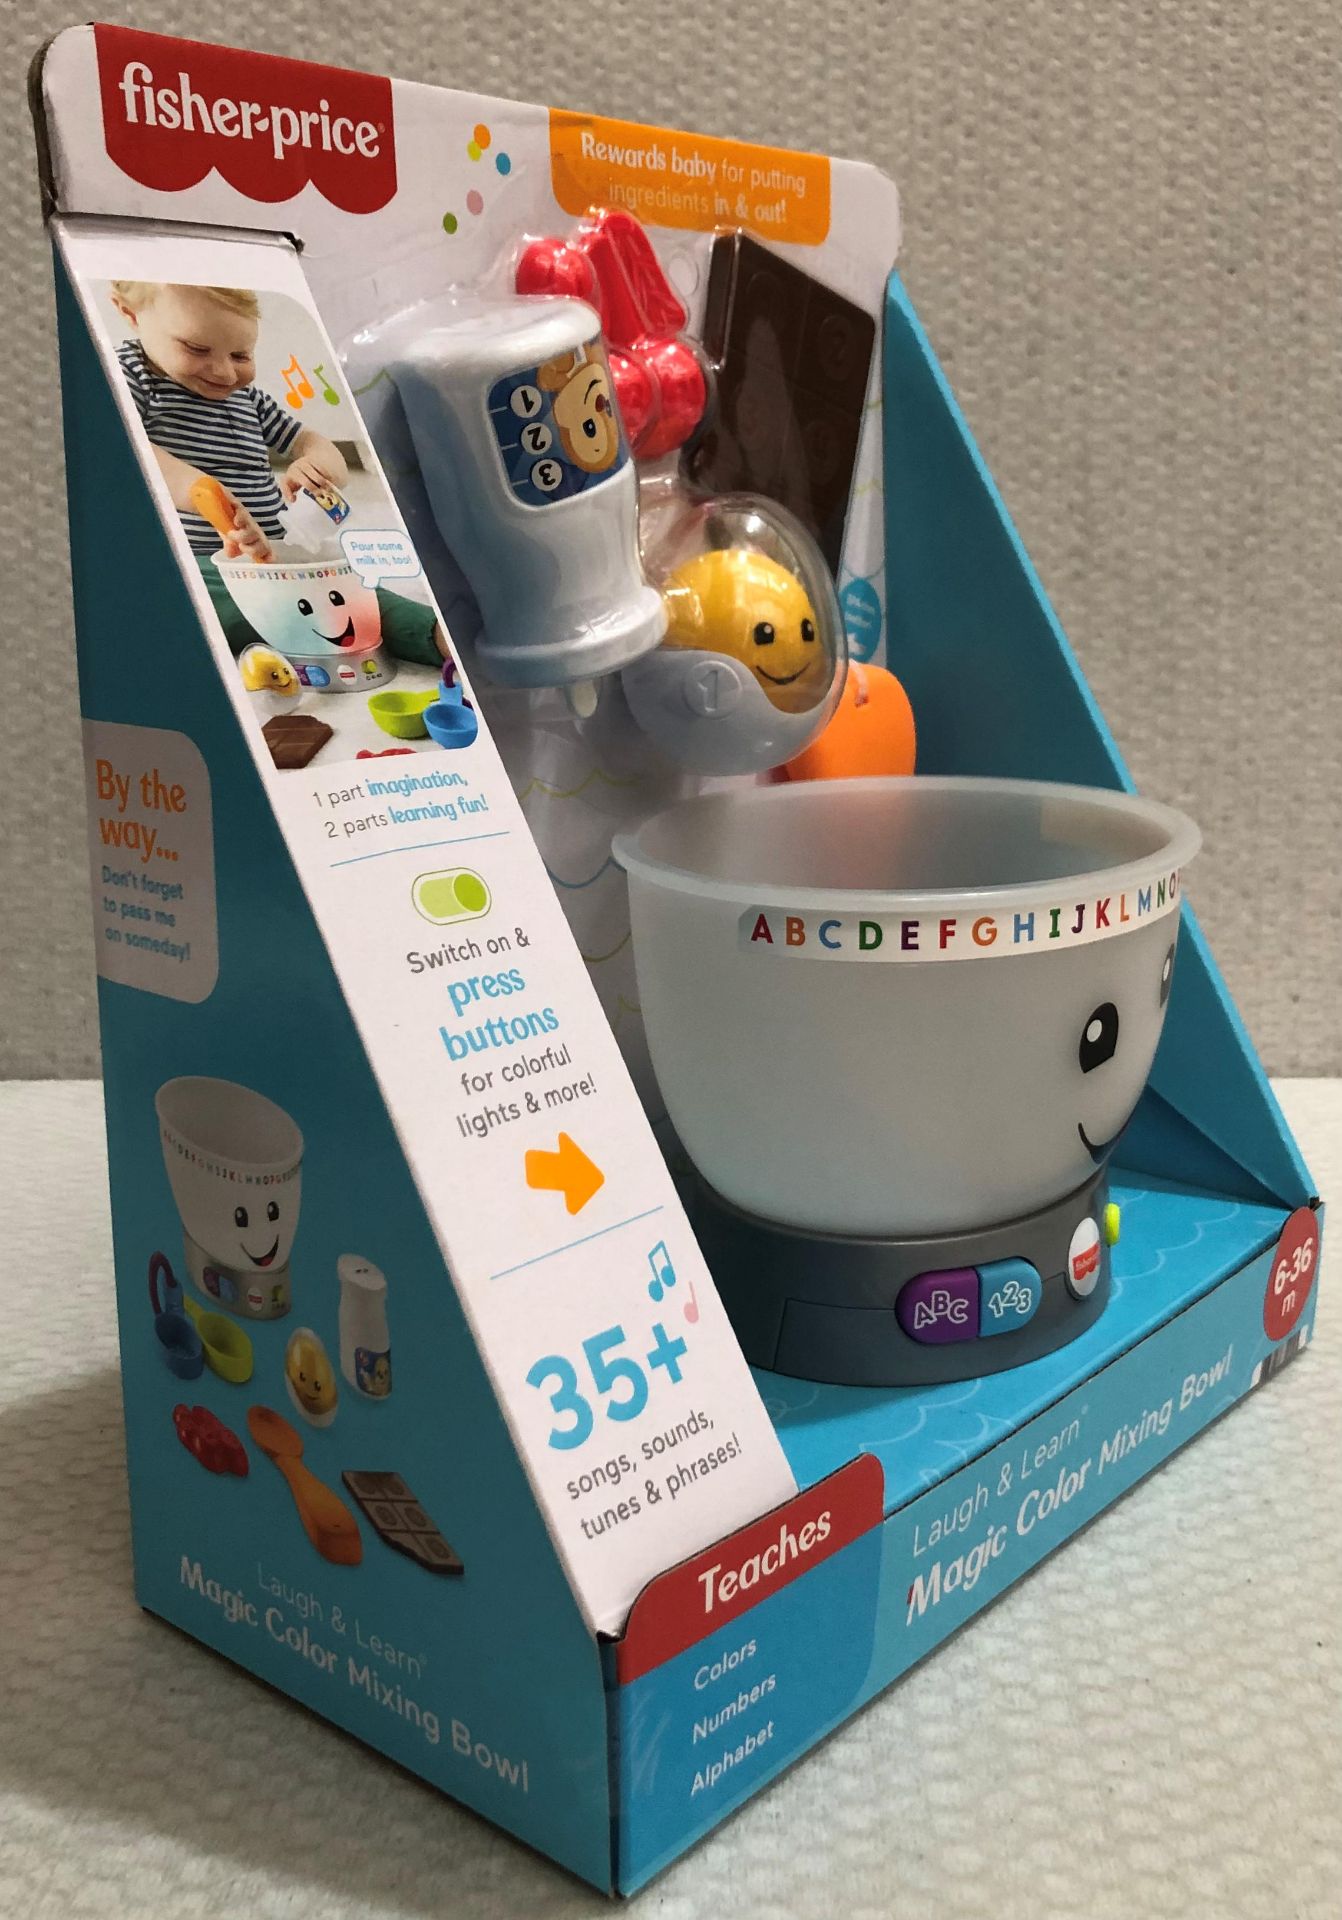 1 x Fisher Price Laugh & Learn Magic Color Mixing Bowl - New/Boxed - HTYS301 - CL987 - Location: - Image 3 of 4